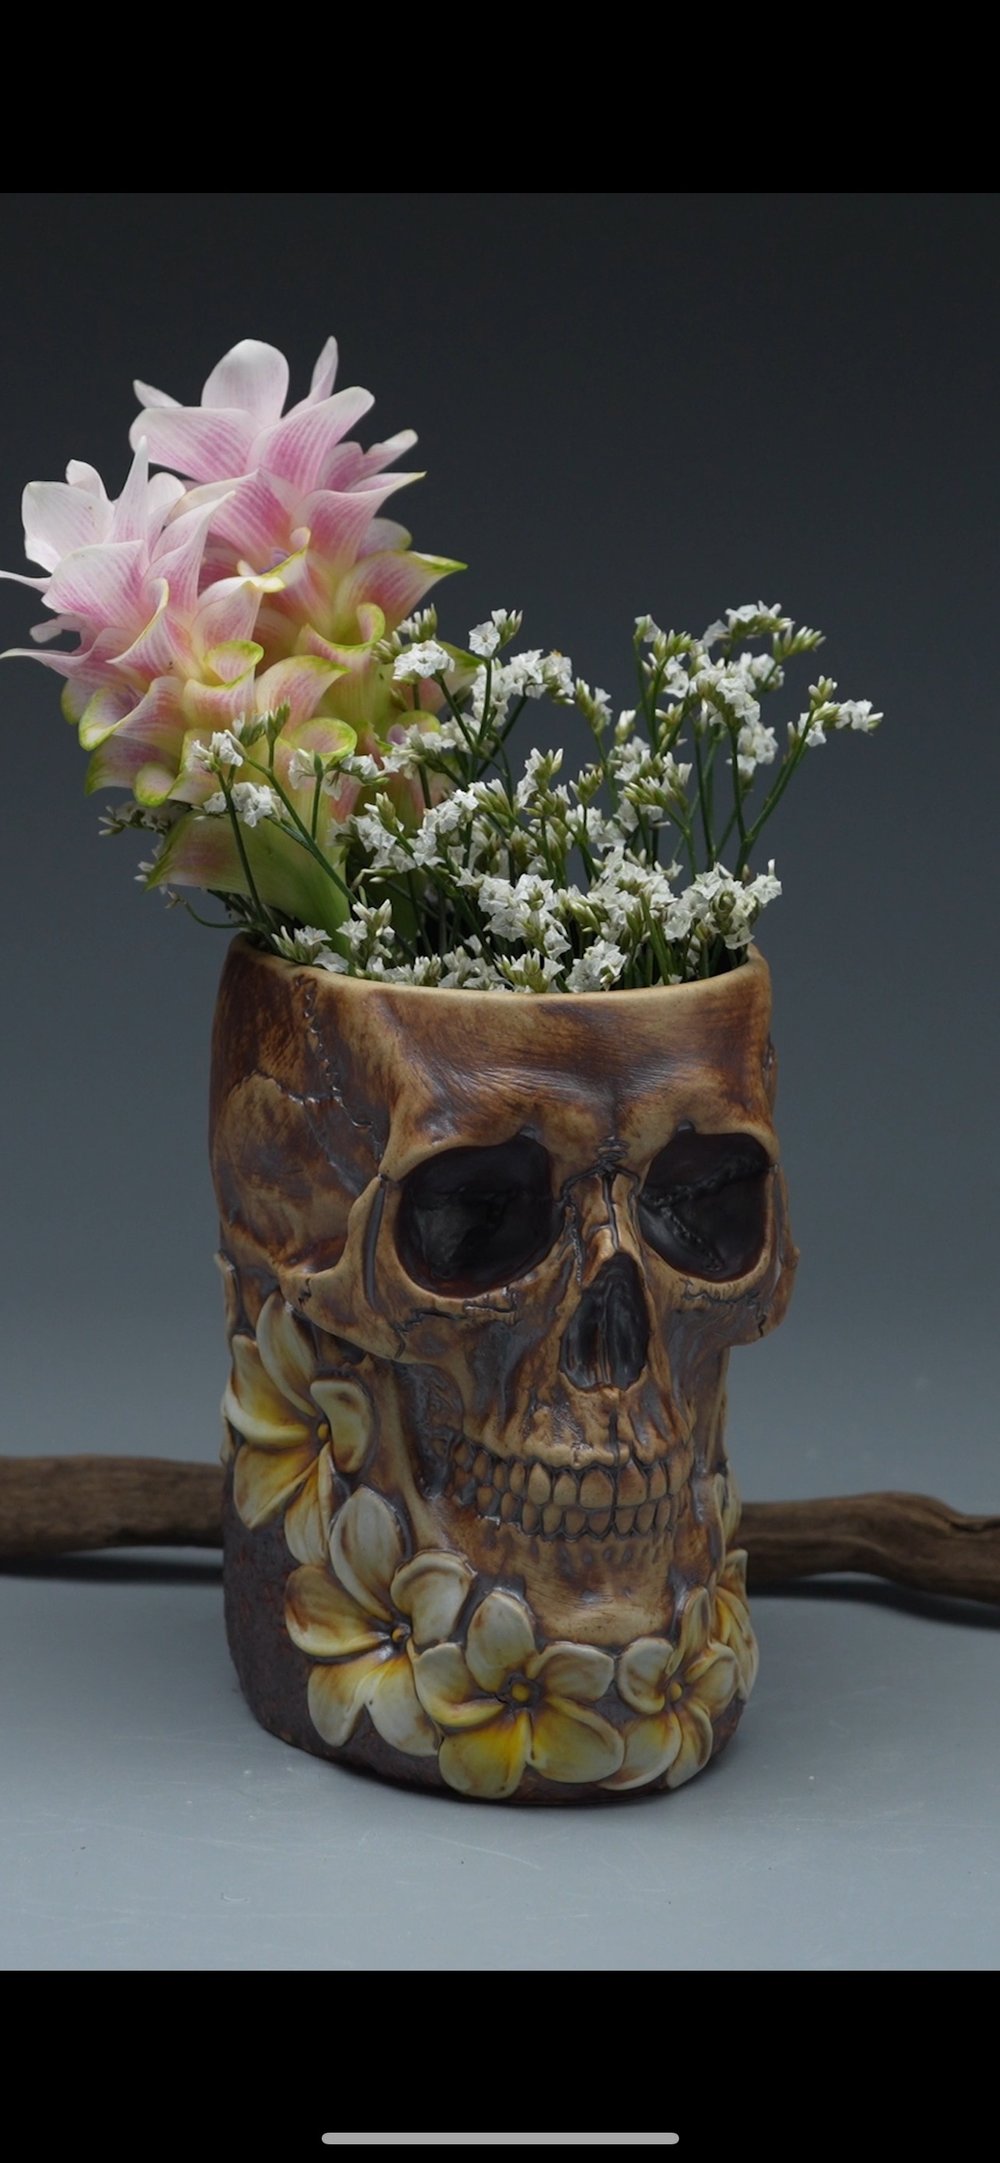 LEI'D TO REST Limited Edition 20oz Tiki Mug - Yellow Flowers from Trevor Foster Studio